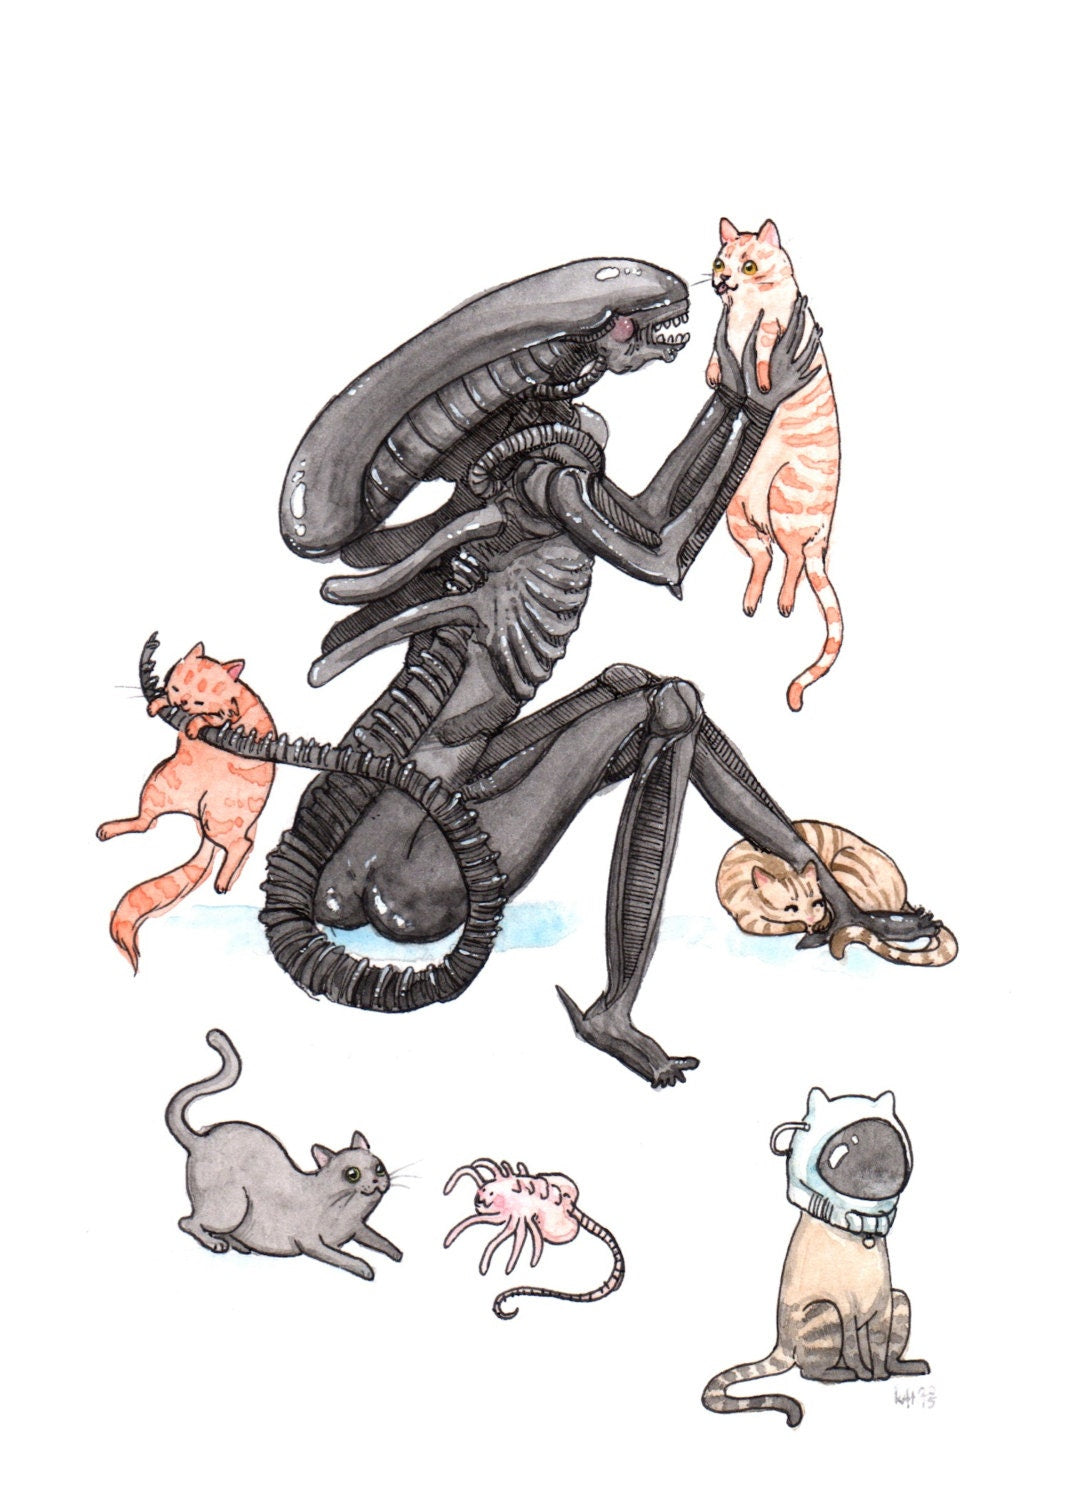 Extra-purrestrial - Alien with Cats Print - - Available in 5x7", 8x10", & 11x14"